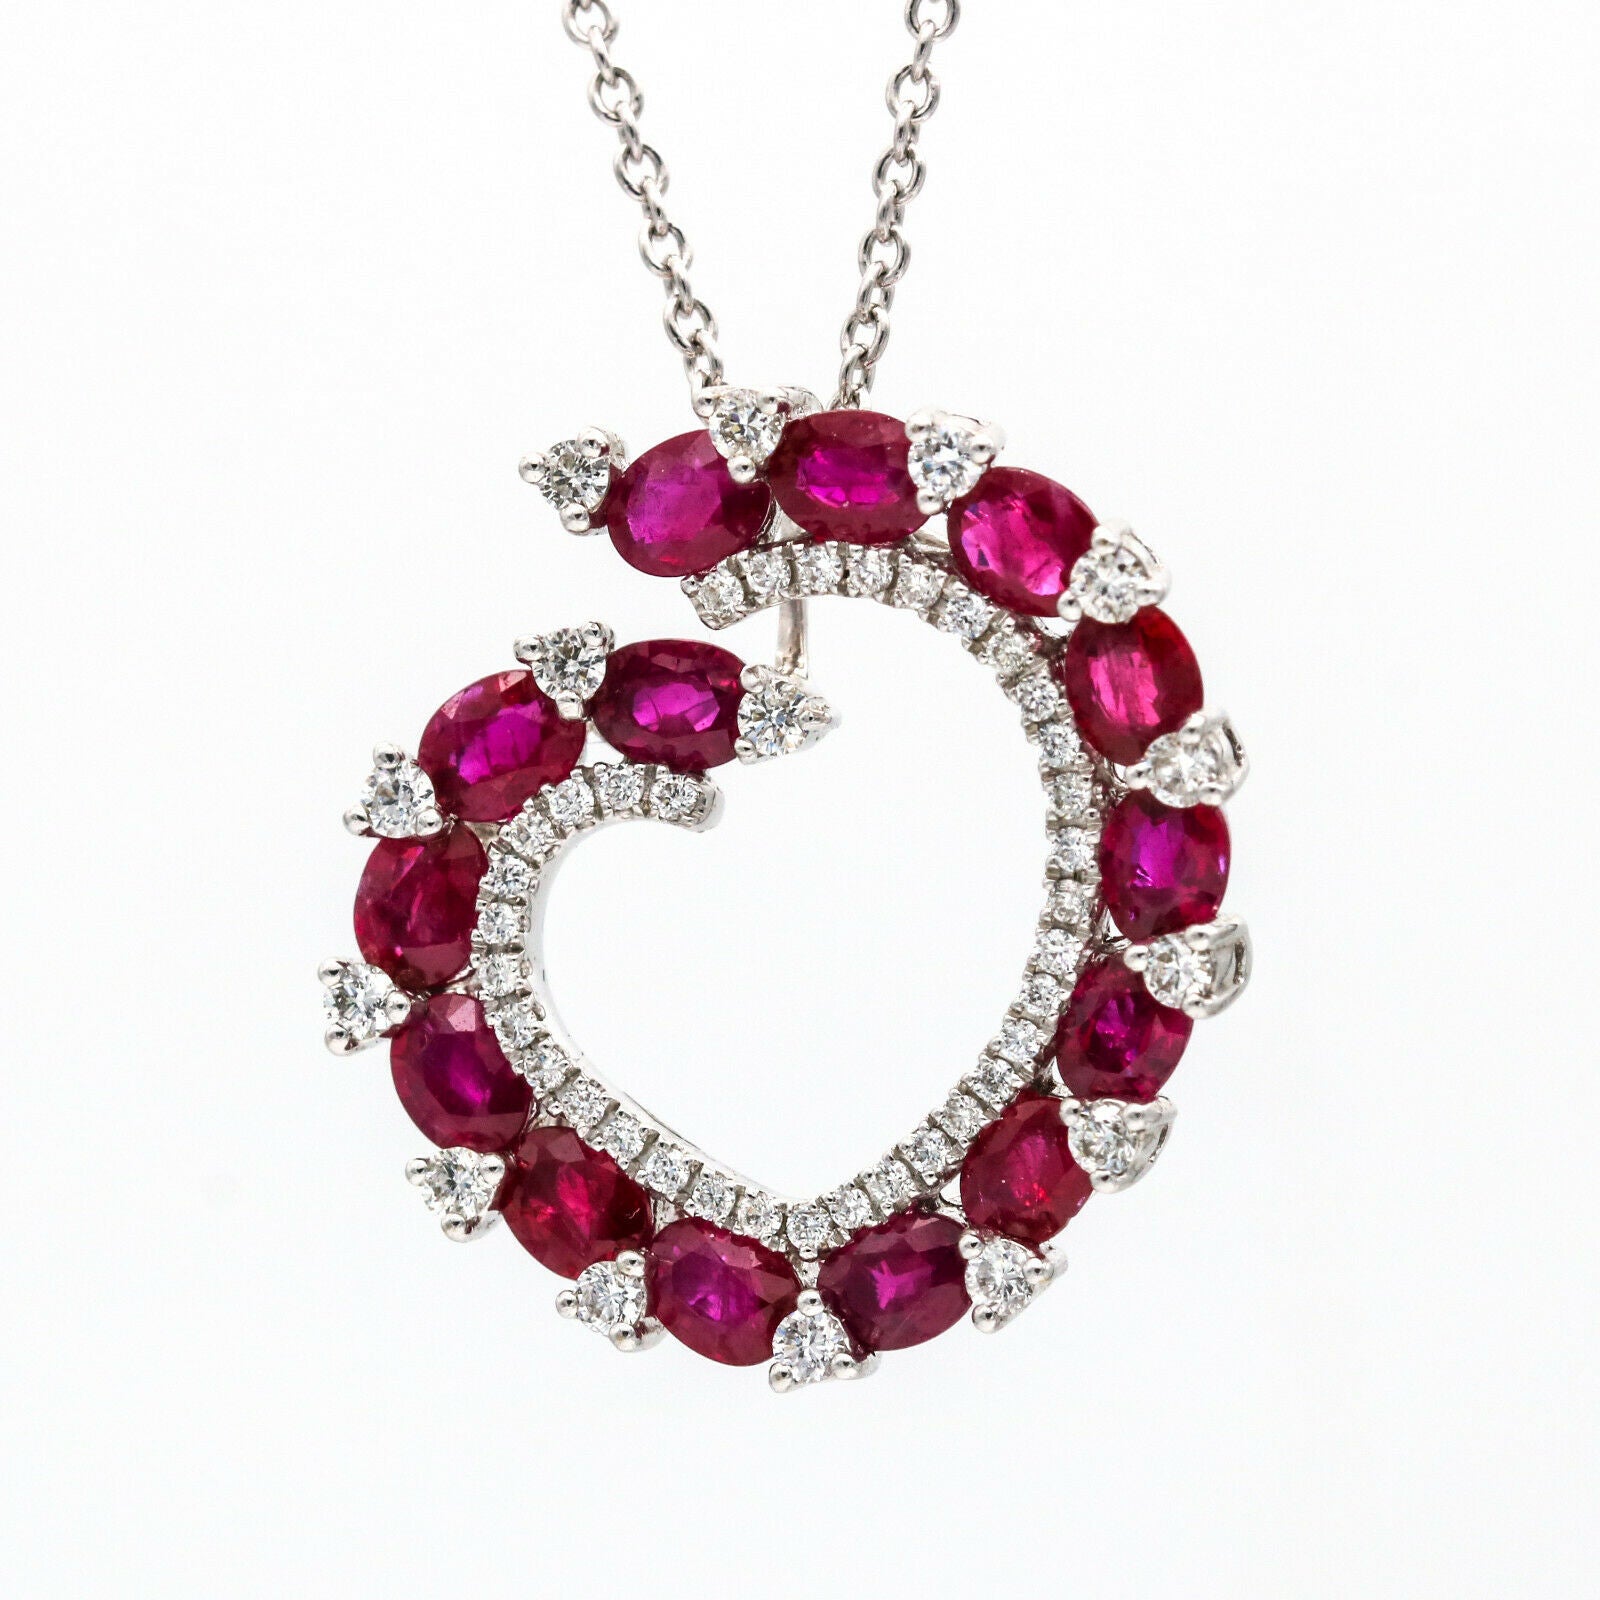 3.87 ct Women's Ruby and Diamond Open Heart Pendant Necklace in 18k White Gold